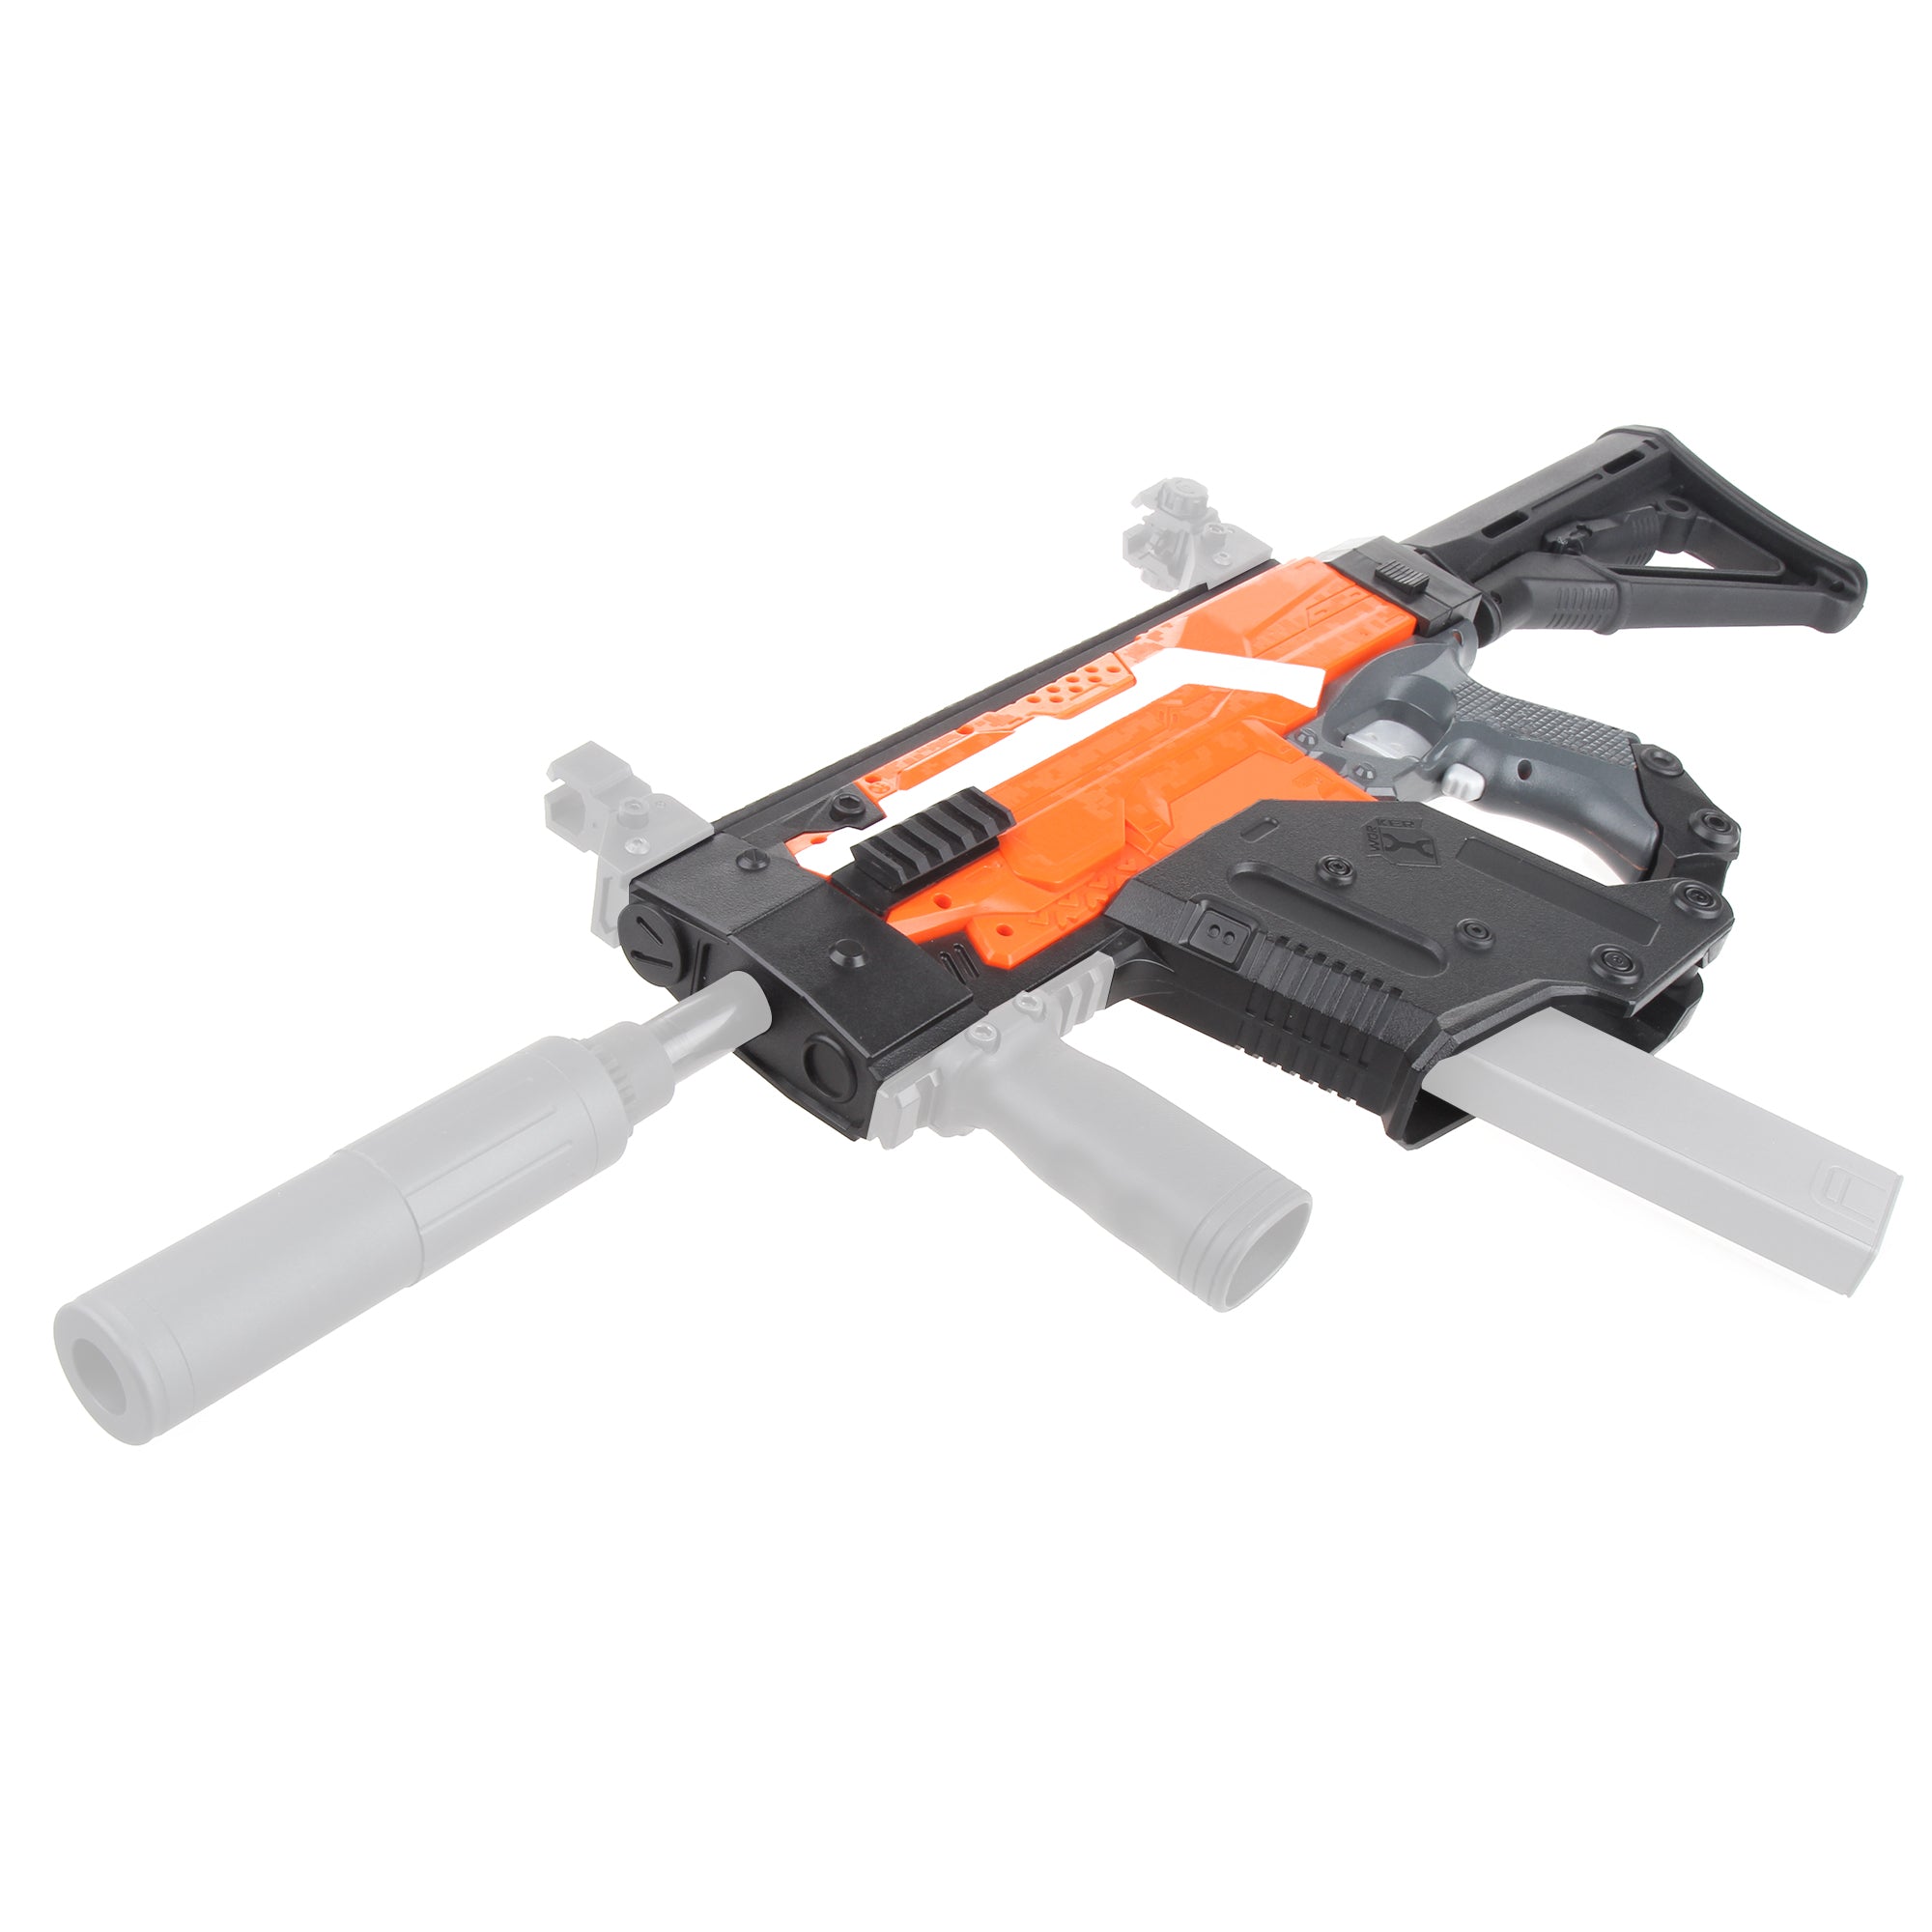 Worker Mod Kriss Vector CTR Stock Imitation Kits Combo 6 Items for Nerf STRYFE Toy Color Black - BlasterMOD